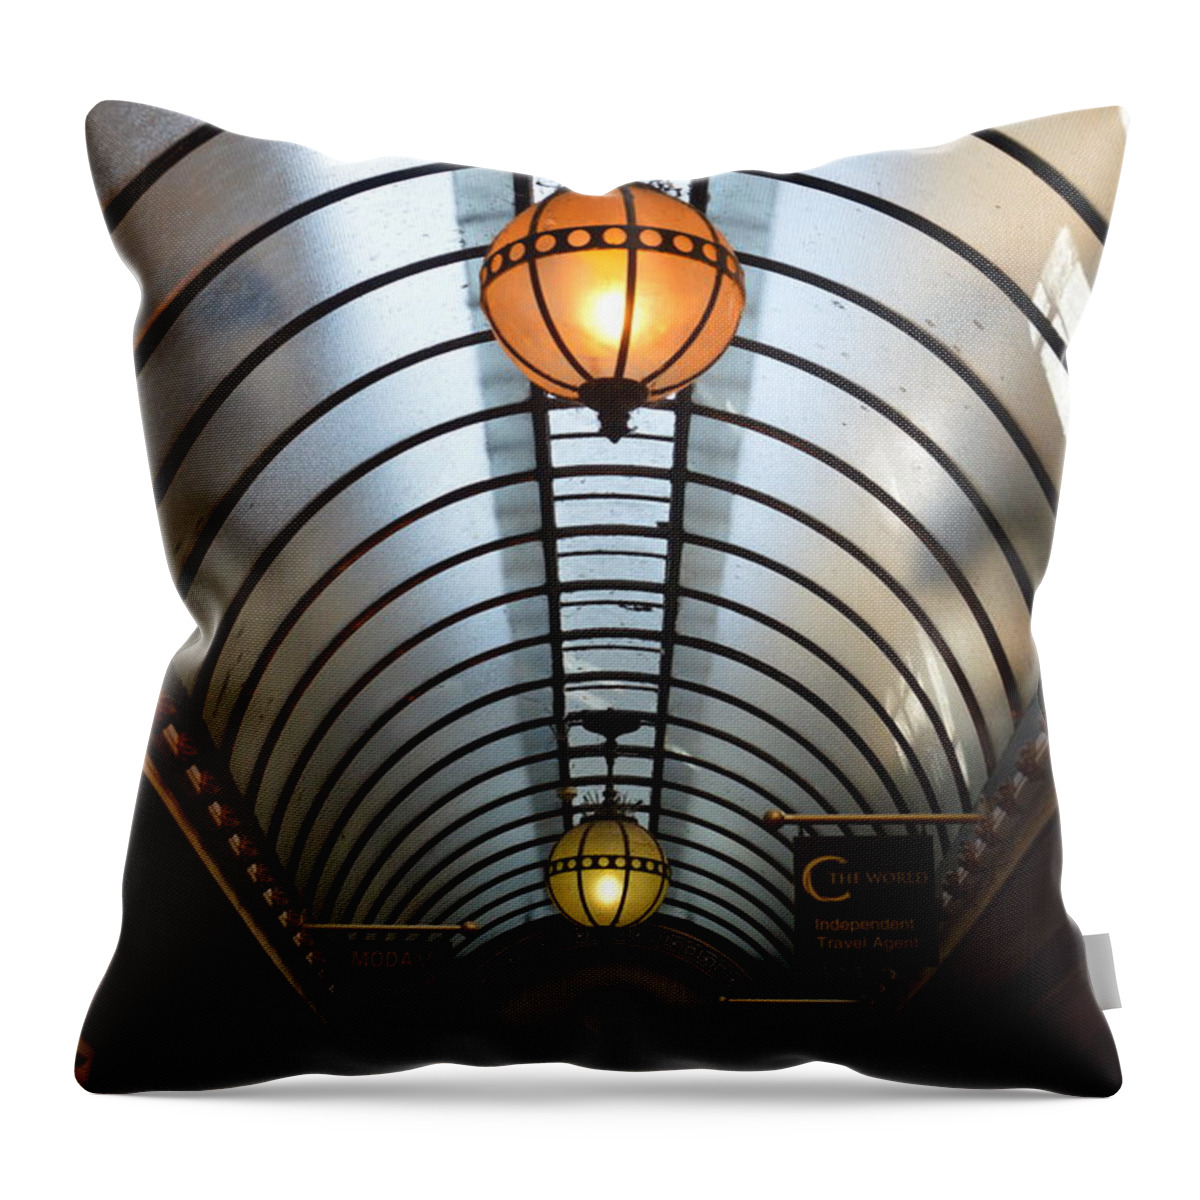 Arcade Throw Pillow featuring the photograph Arcade Roof by Andy Thompson